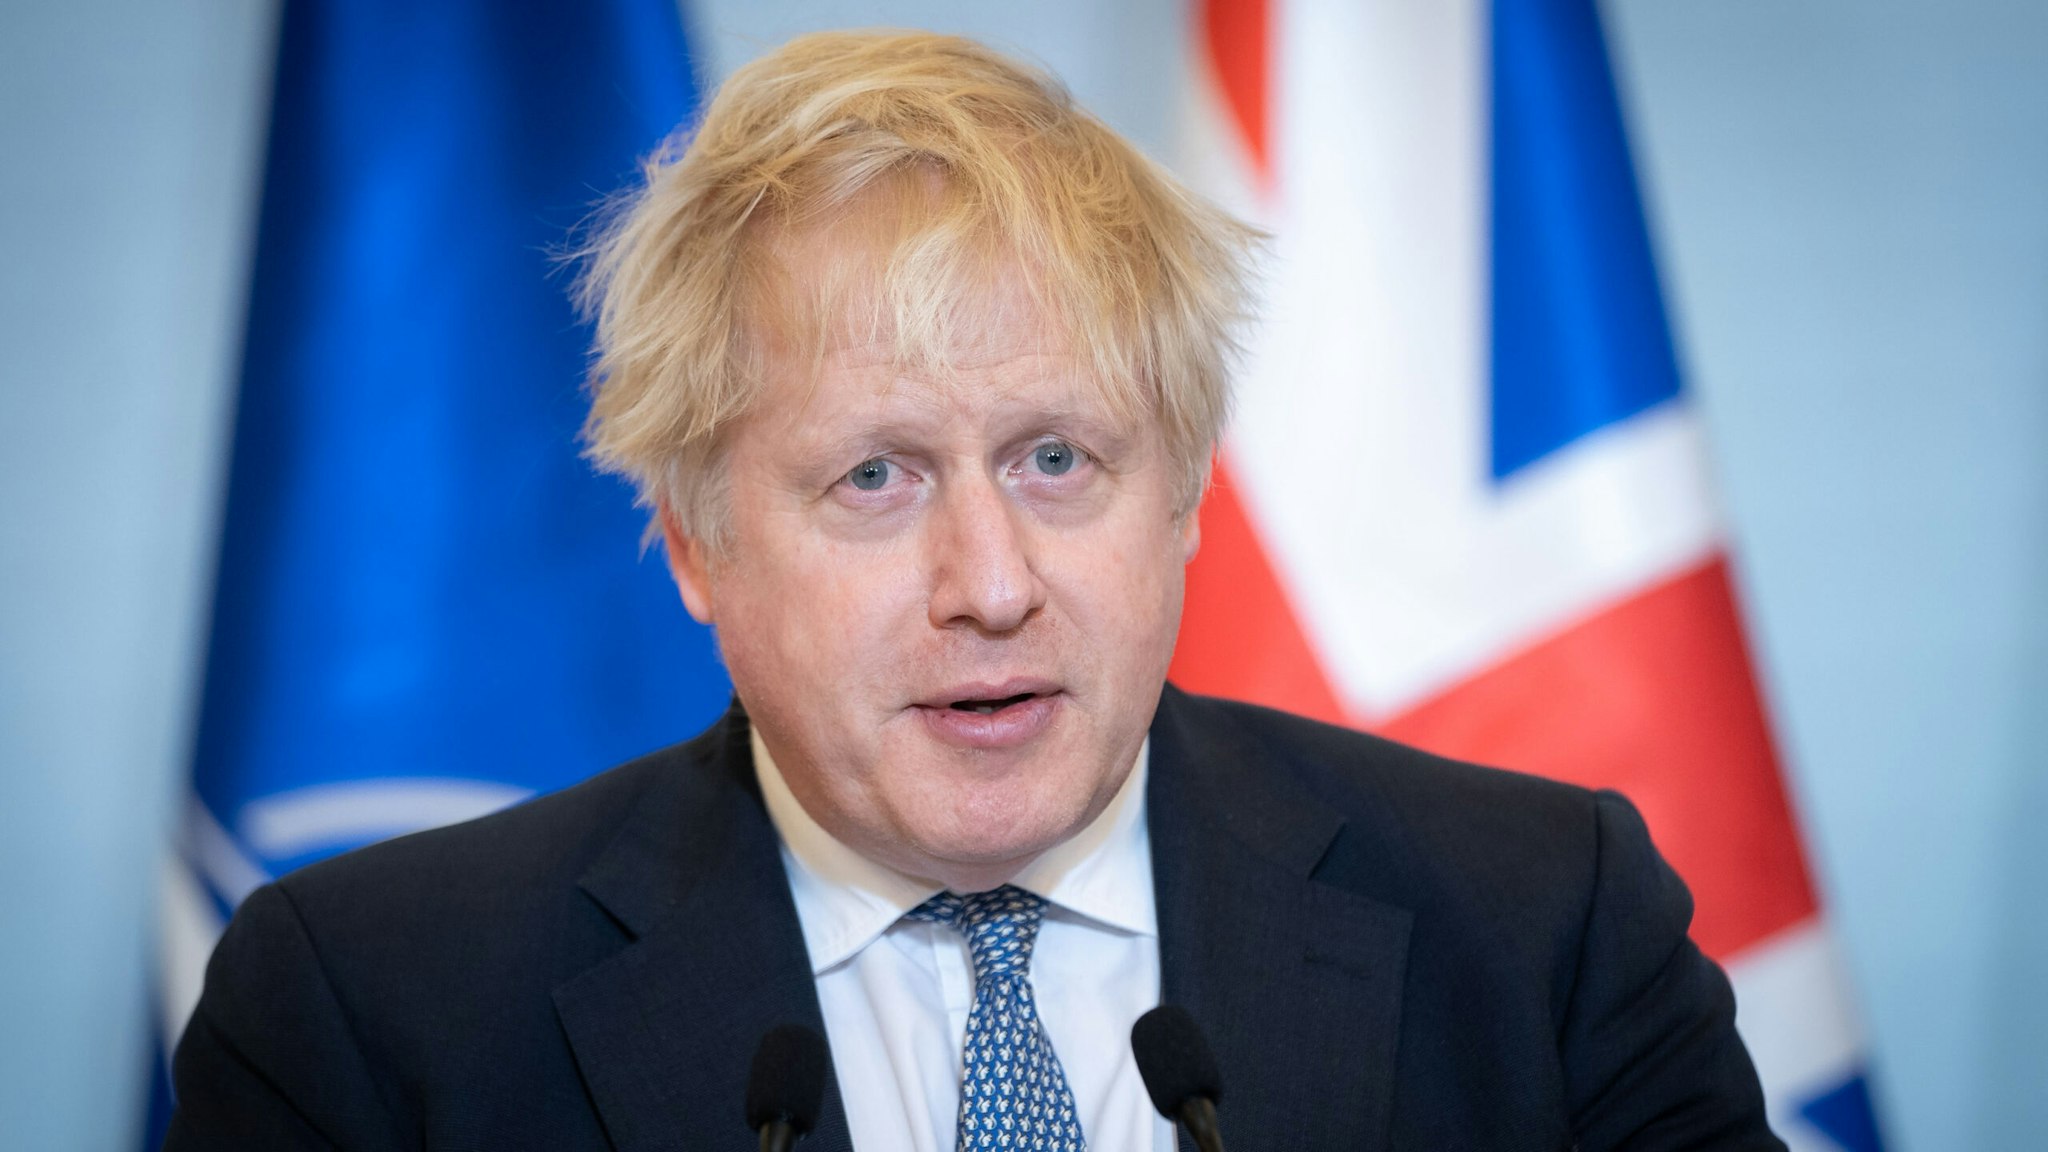 British Prime Minister Boris Johnson during a press conference, after meeting with Polish Prime Minister Mateusz Morawiecki in Warsaw, Poland, on 10 February 2022.